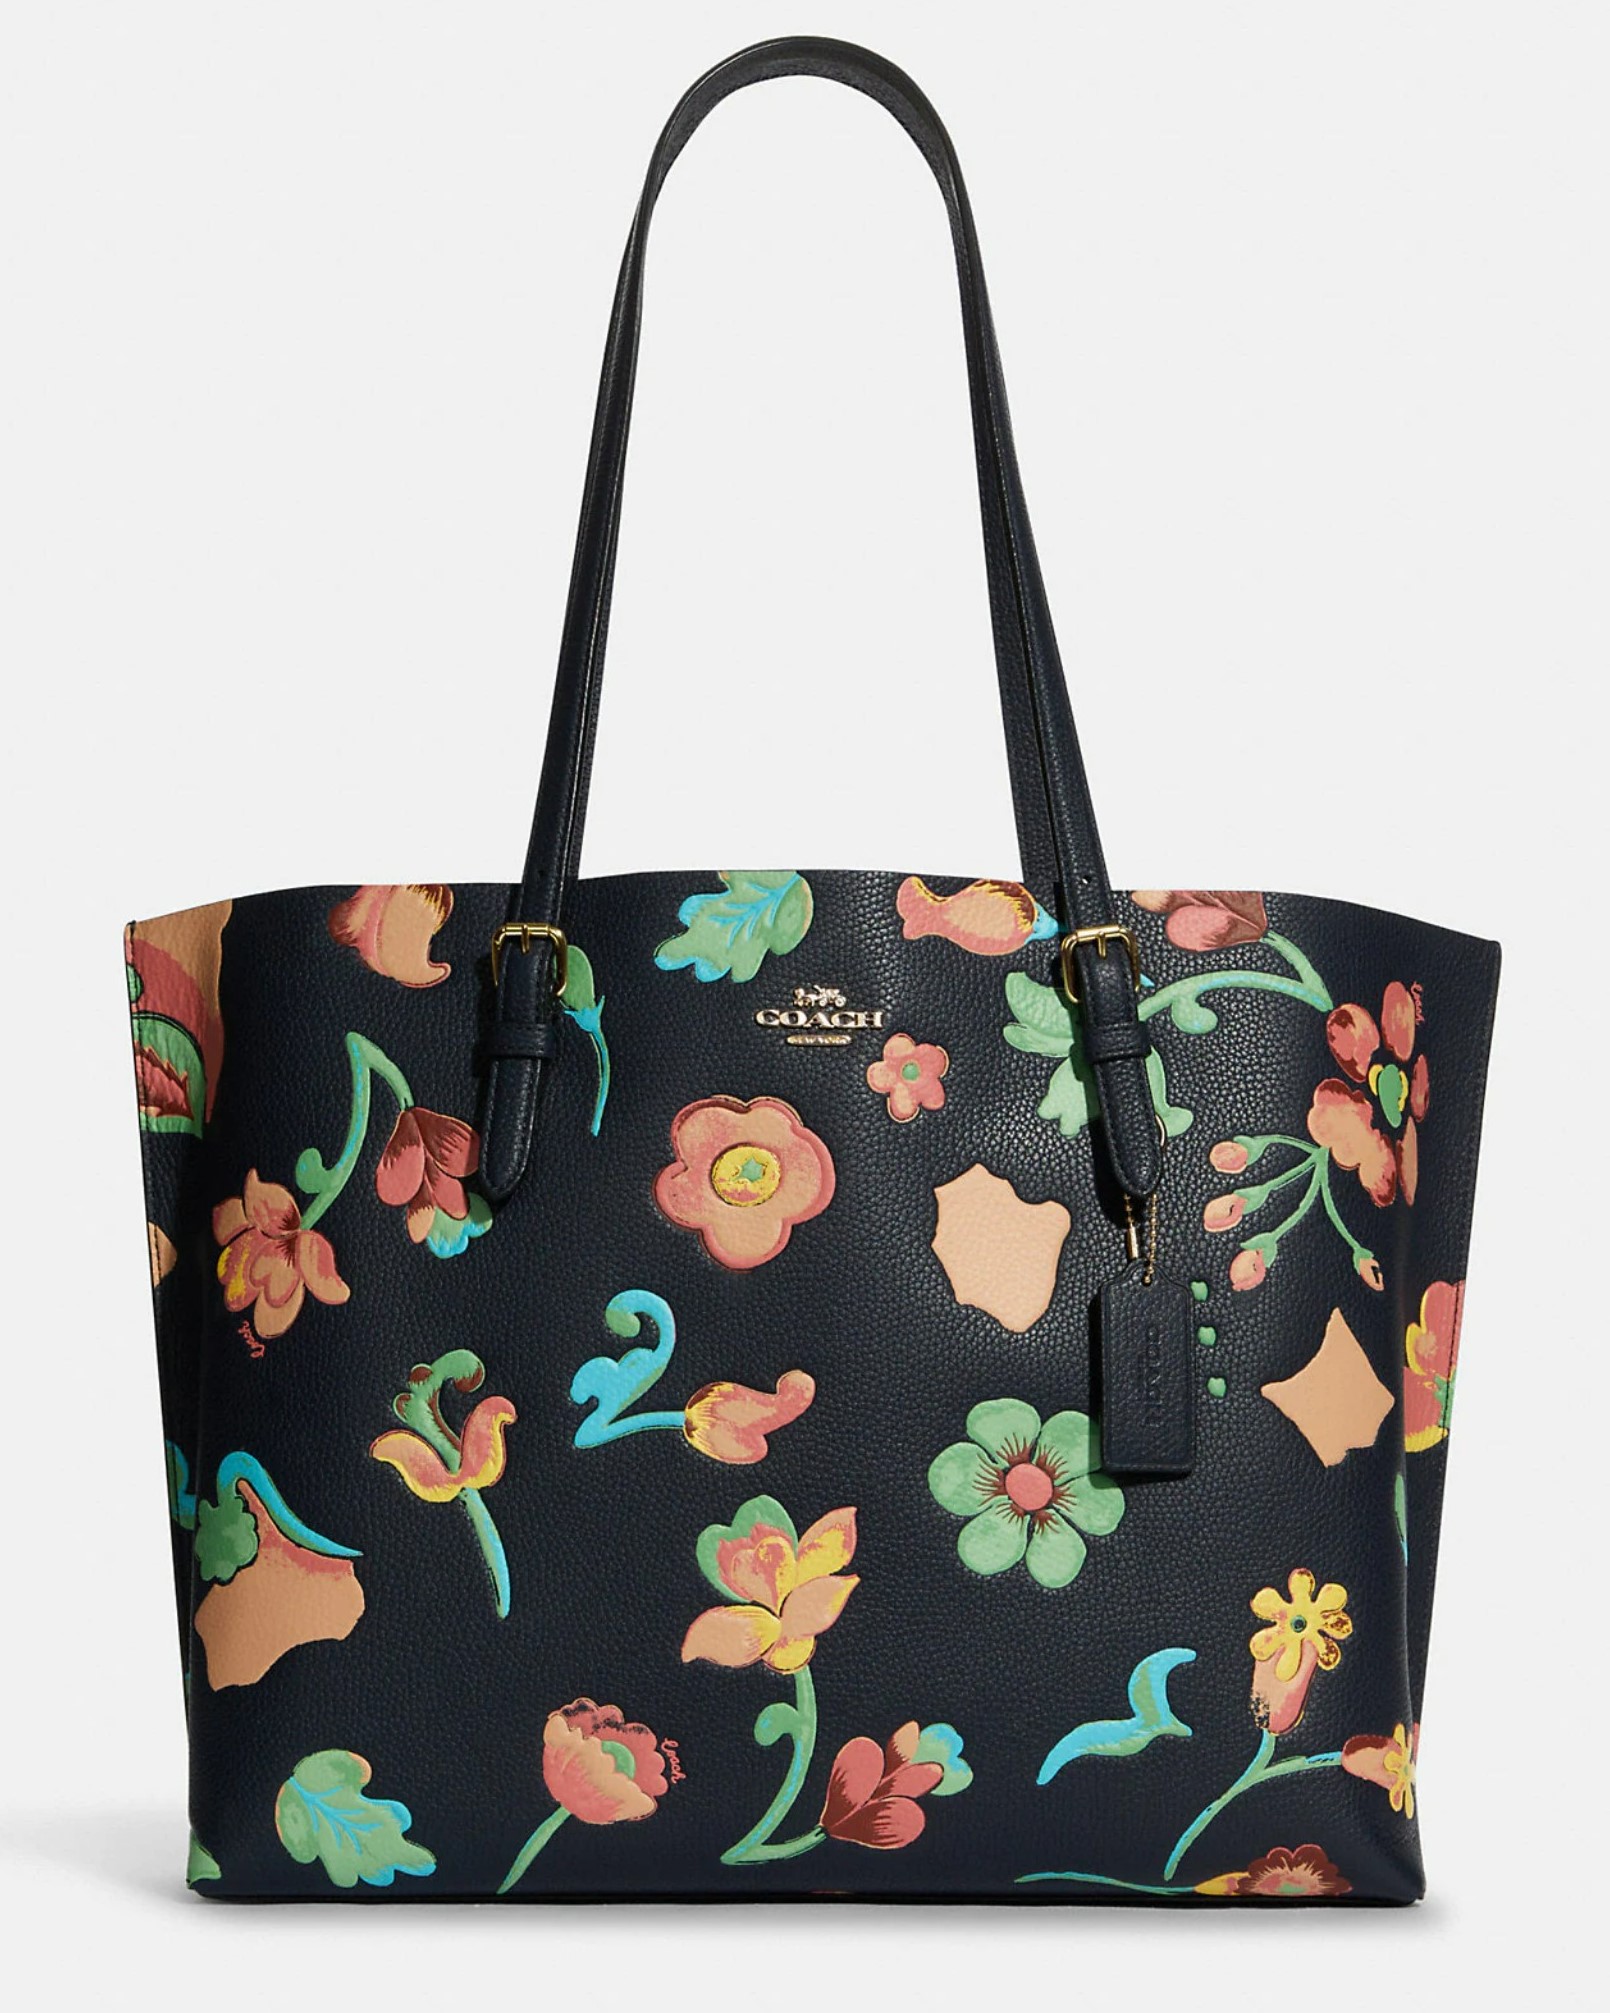 TÚI COACH MOLLIE TOTE WITH DREAMY LAND FLORAL PRINT 1